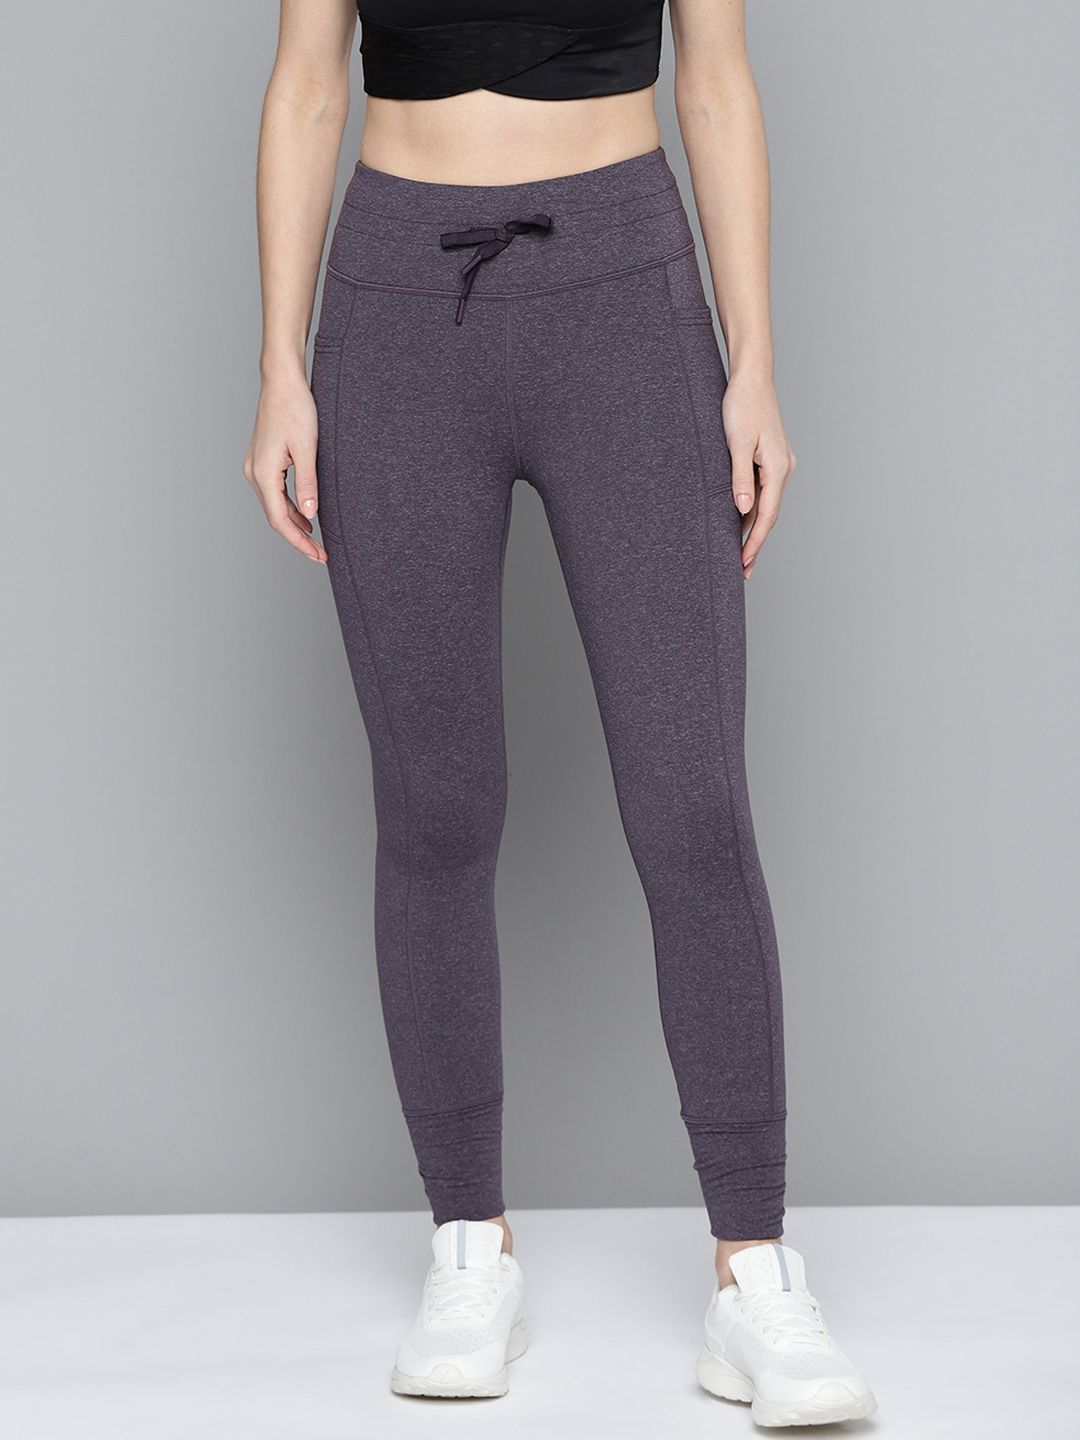 Skechers Women Charcoal Grey High Waist Goflex Luxe Jogging Tights Price in  India, Full Specifications & Offers